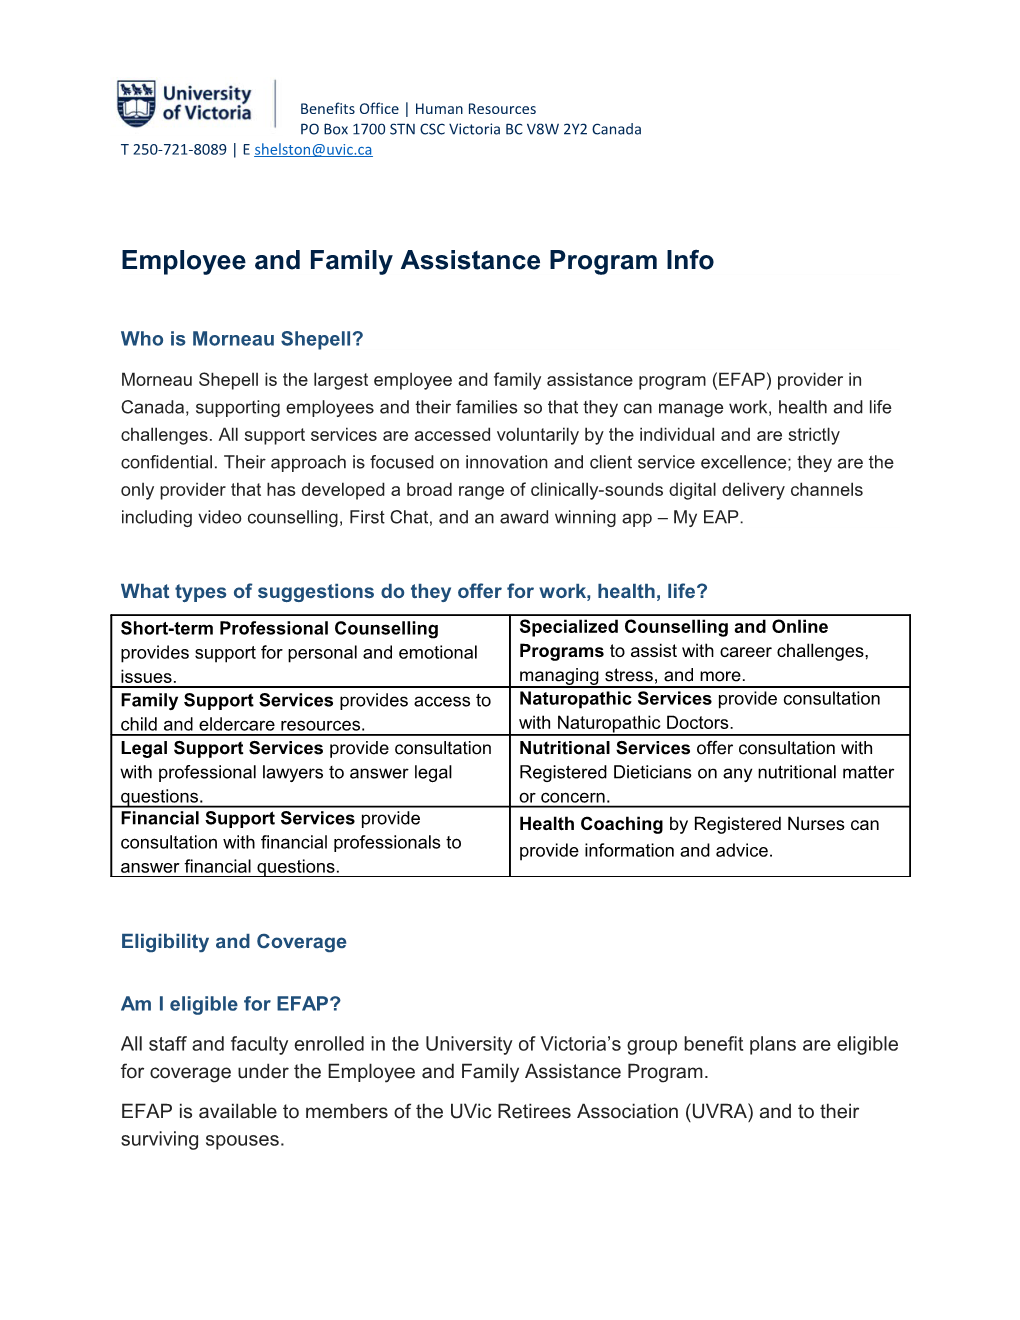 Employee and Family Assistance Program Info